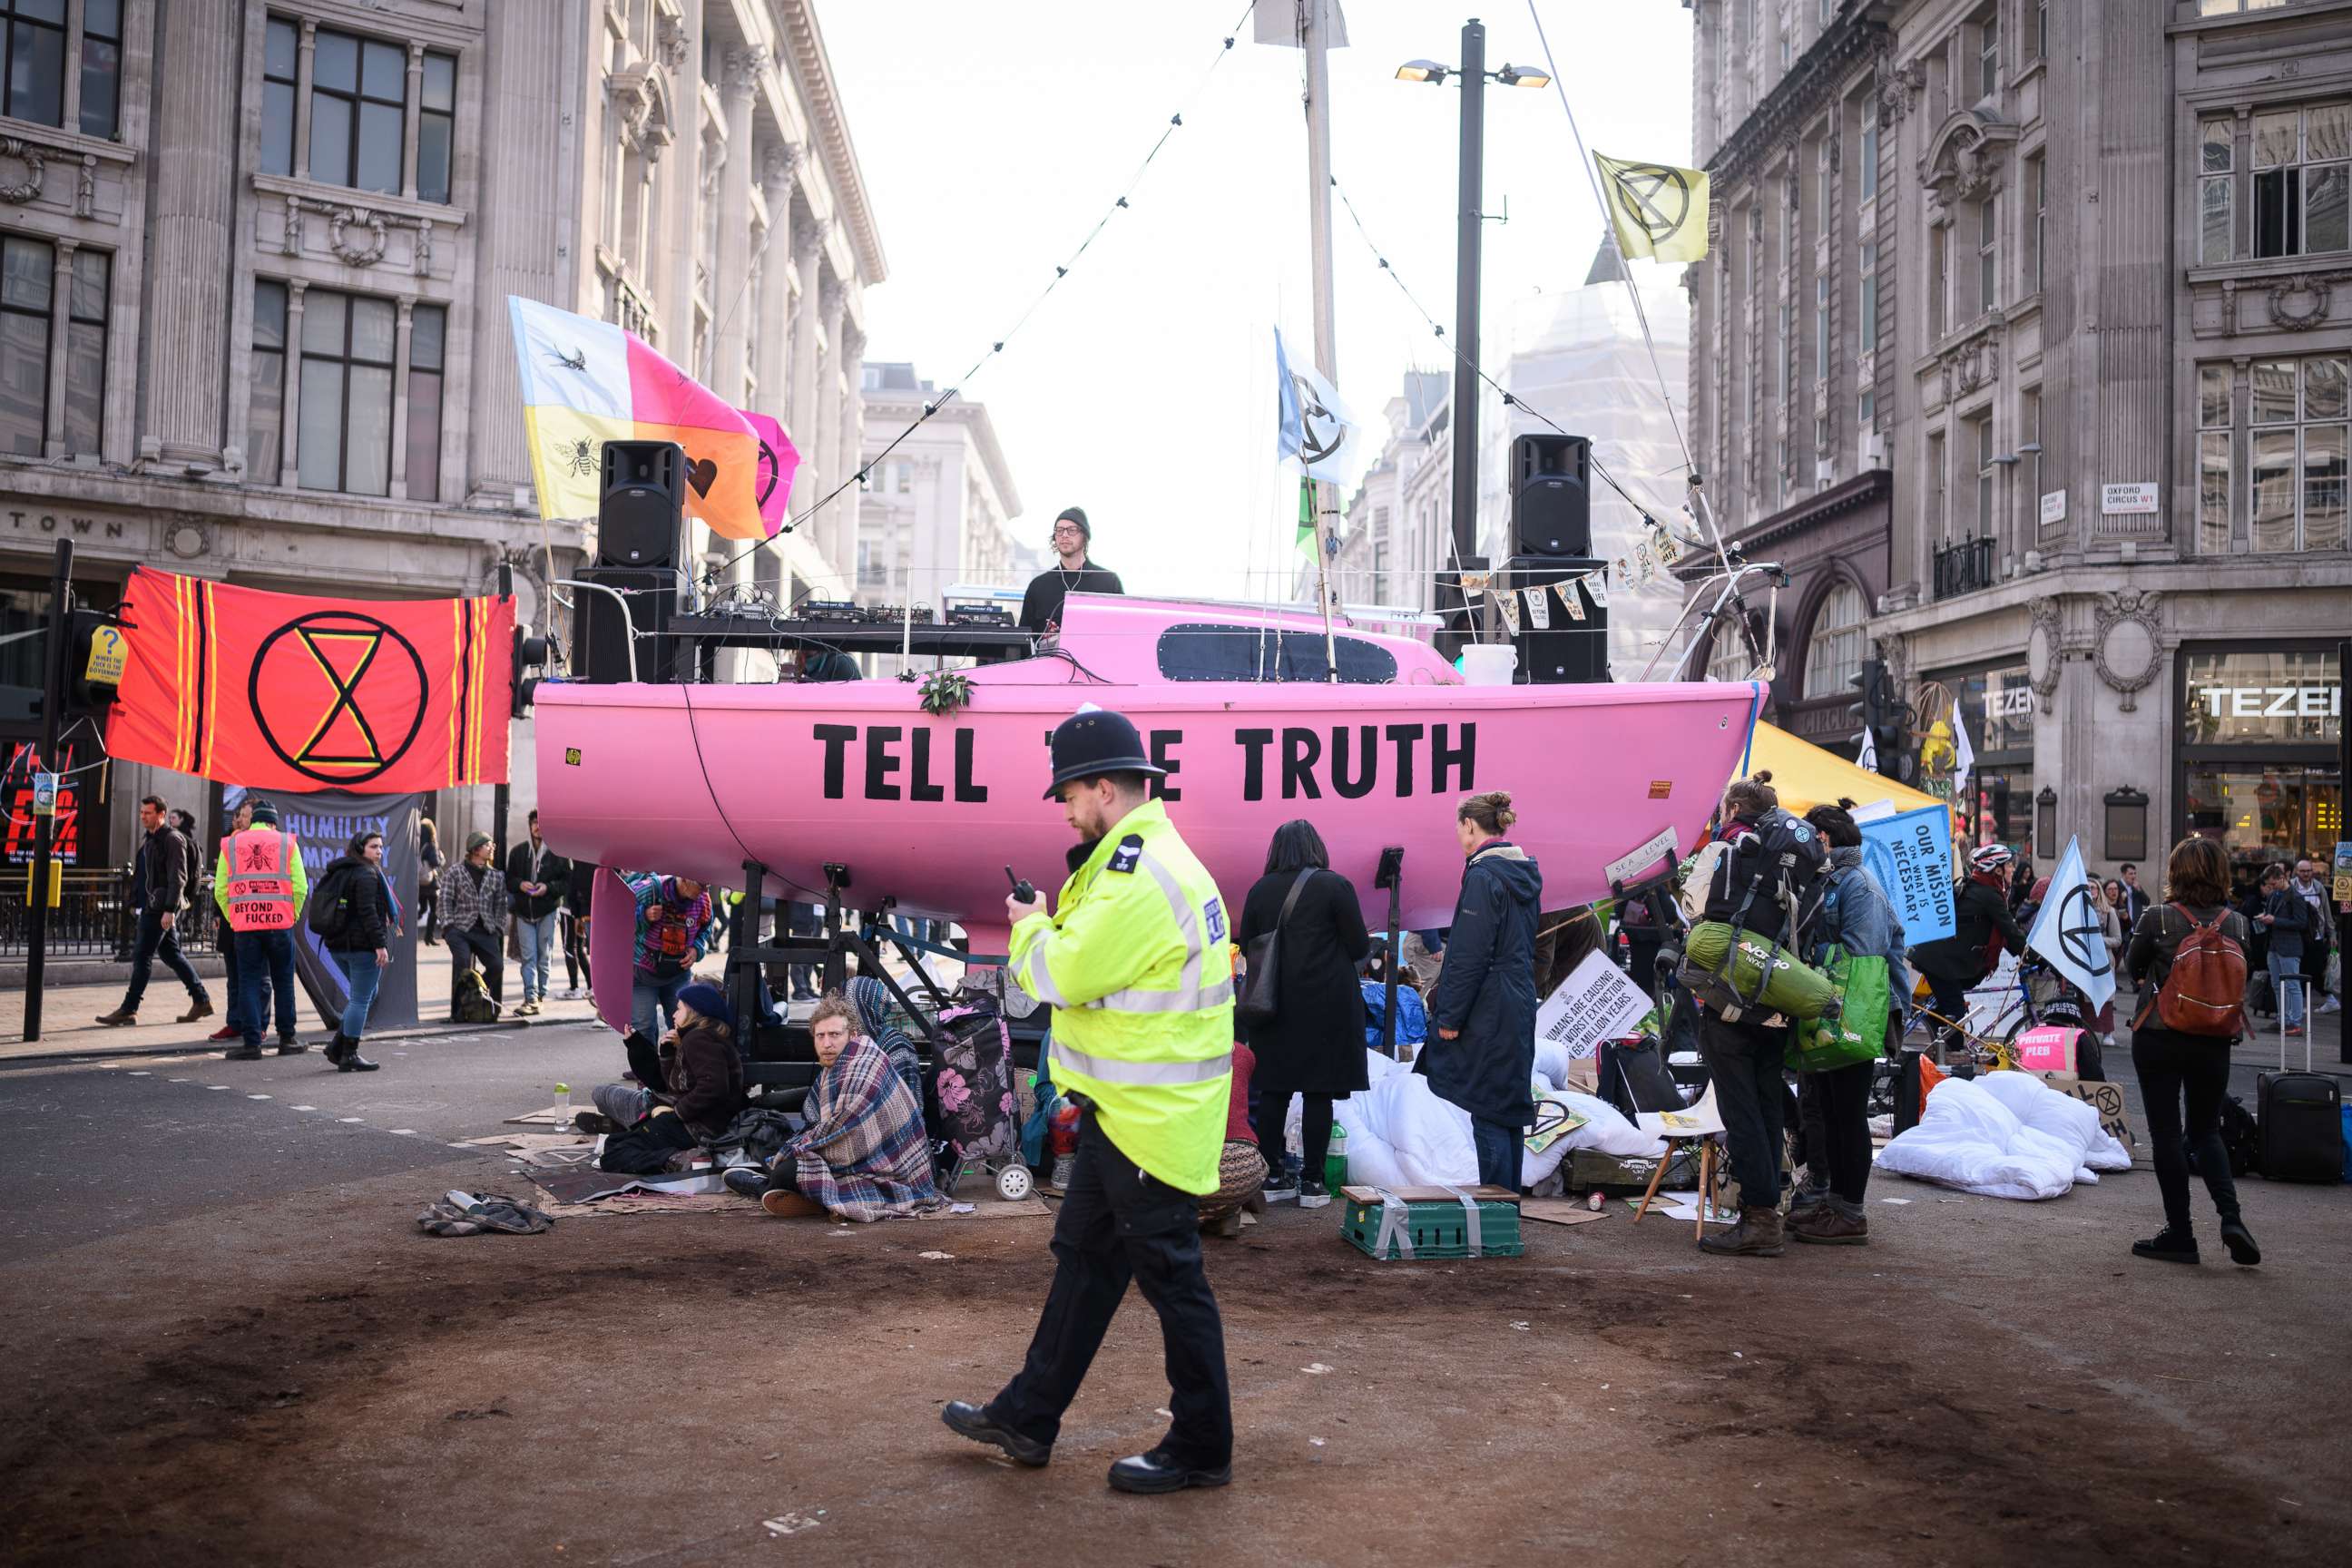 PHOTO: A police officer passes protester's tents and the Extinction Rebellion boat in the center of Oxford Circus on April 17, 2019 in London.